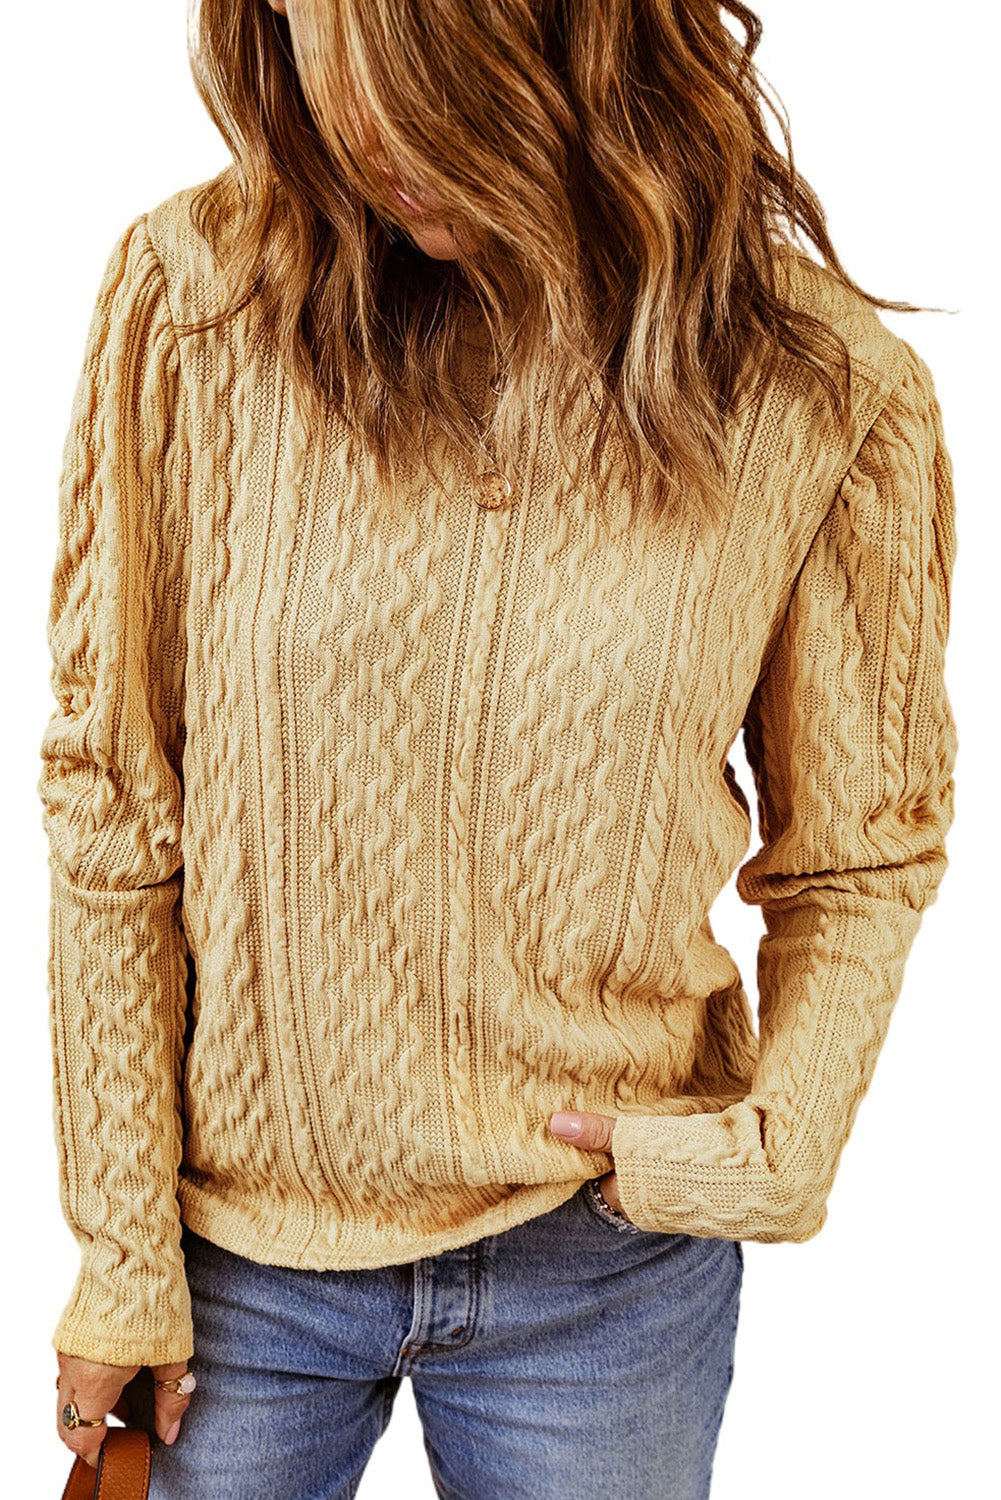 Solid Color Puffy Sleeve Textured Knit Top